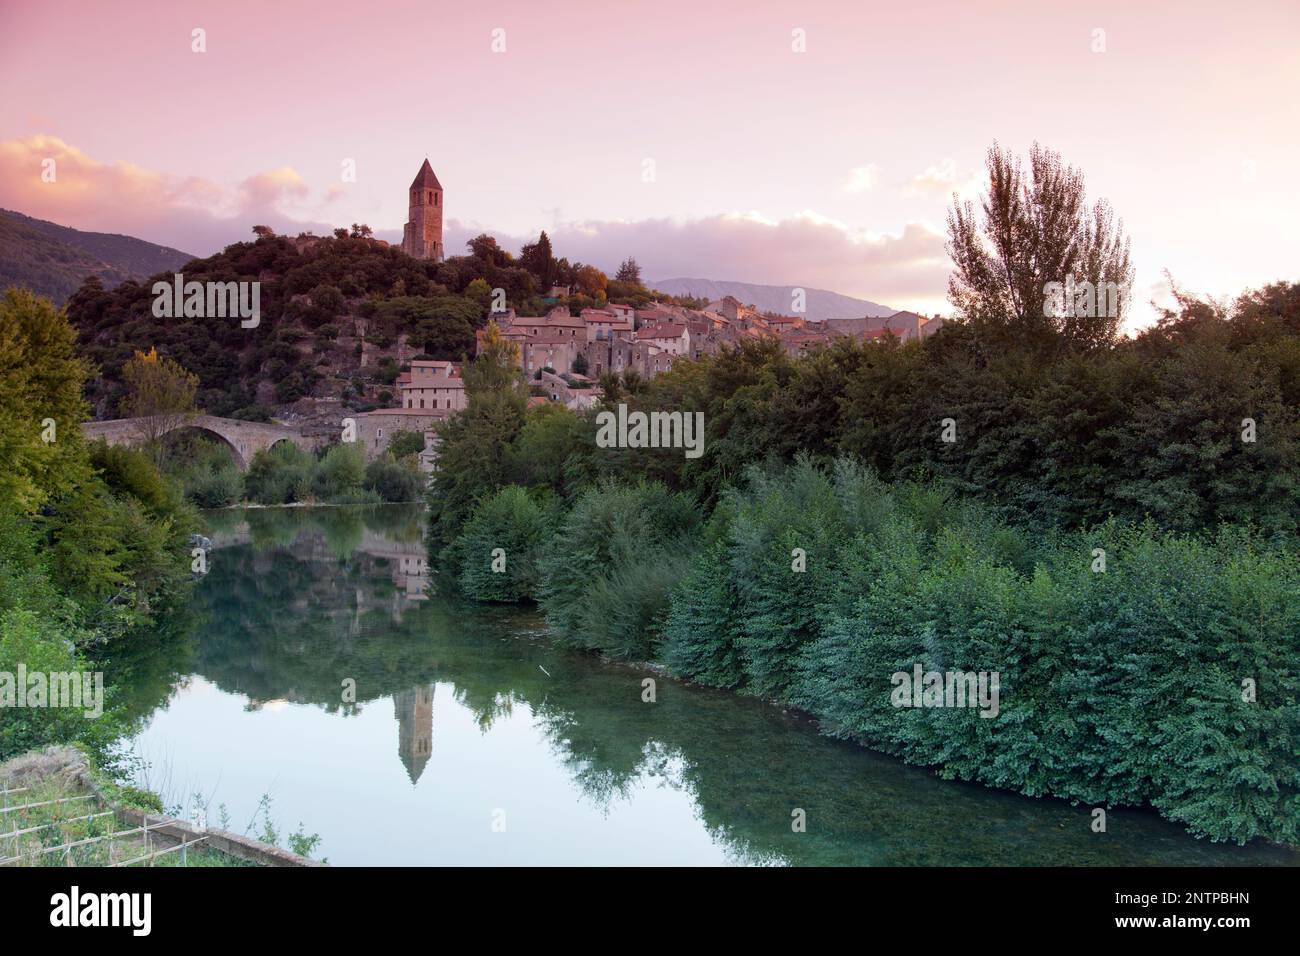 France, Languedoc-Roussilon, Olargues, Pont du Diable bridge and the pretty hill top village of Olargues in the Black Mountains. Stock Photo